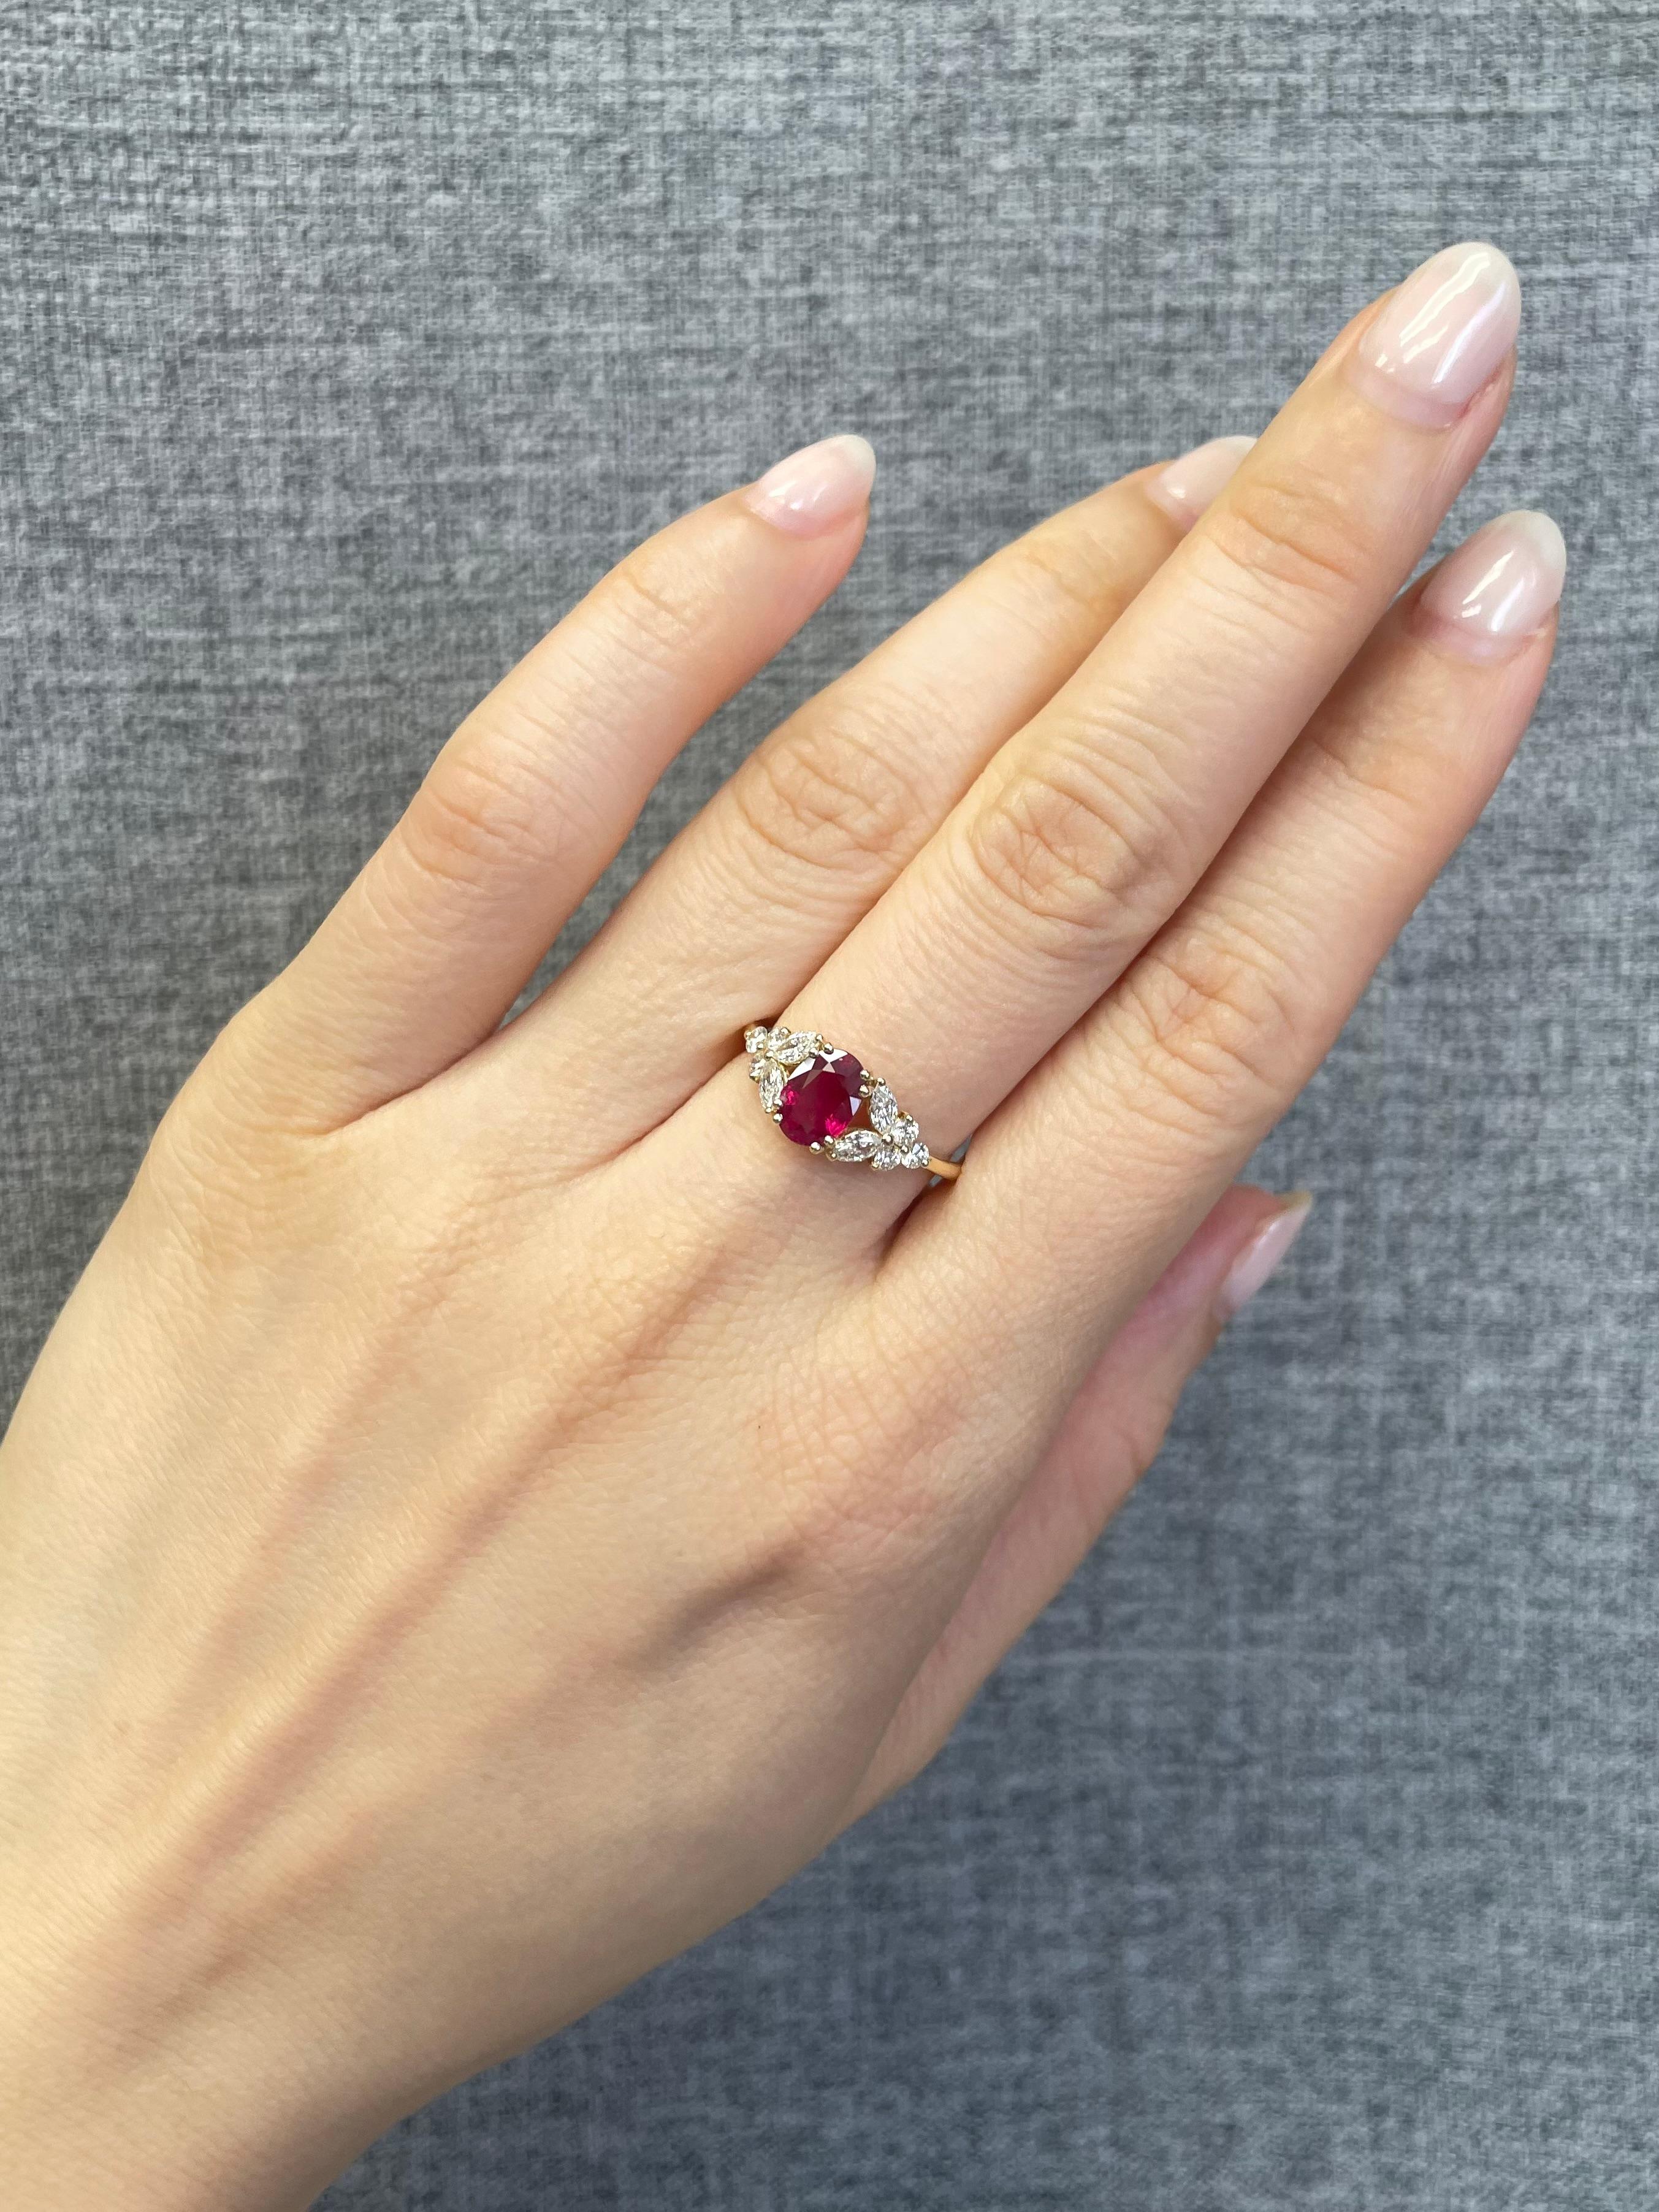 For Sale:  Natural Genuine Ruby and Marquise Diamonds Ring Made in 14k Yellow Gold  4